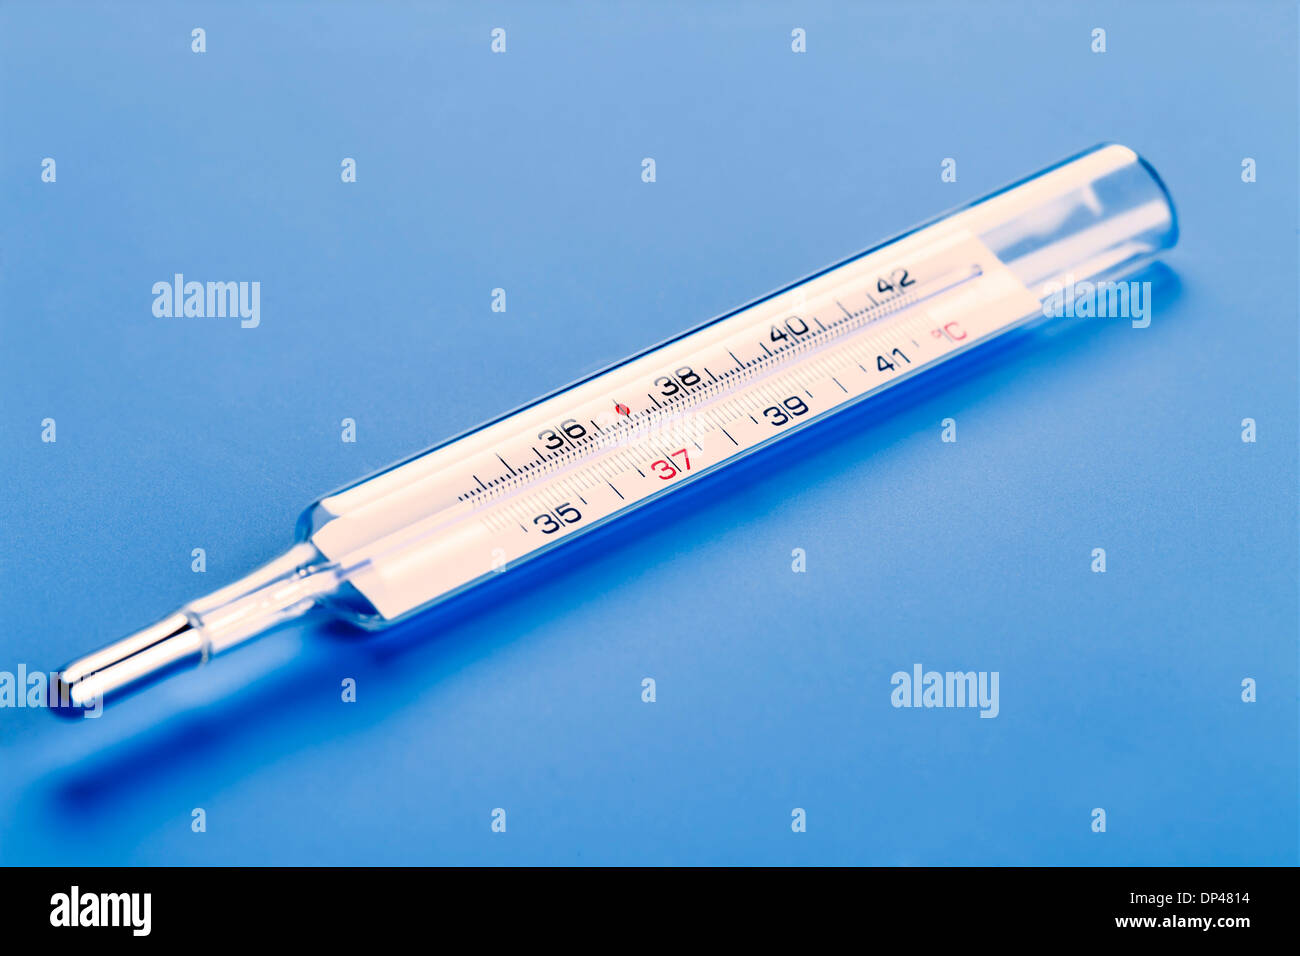 Medical thermometer Stock Photo